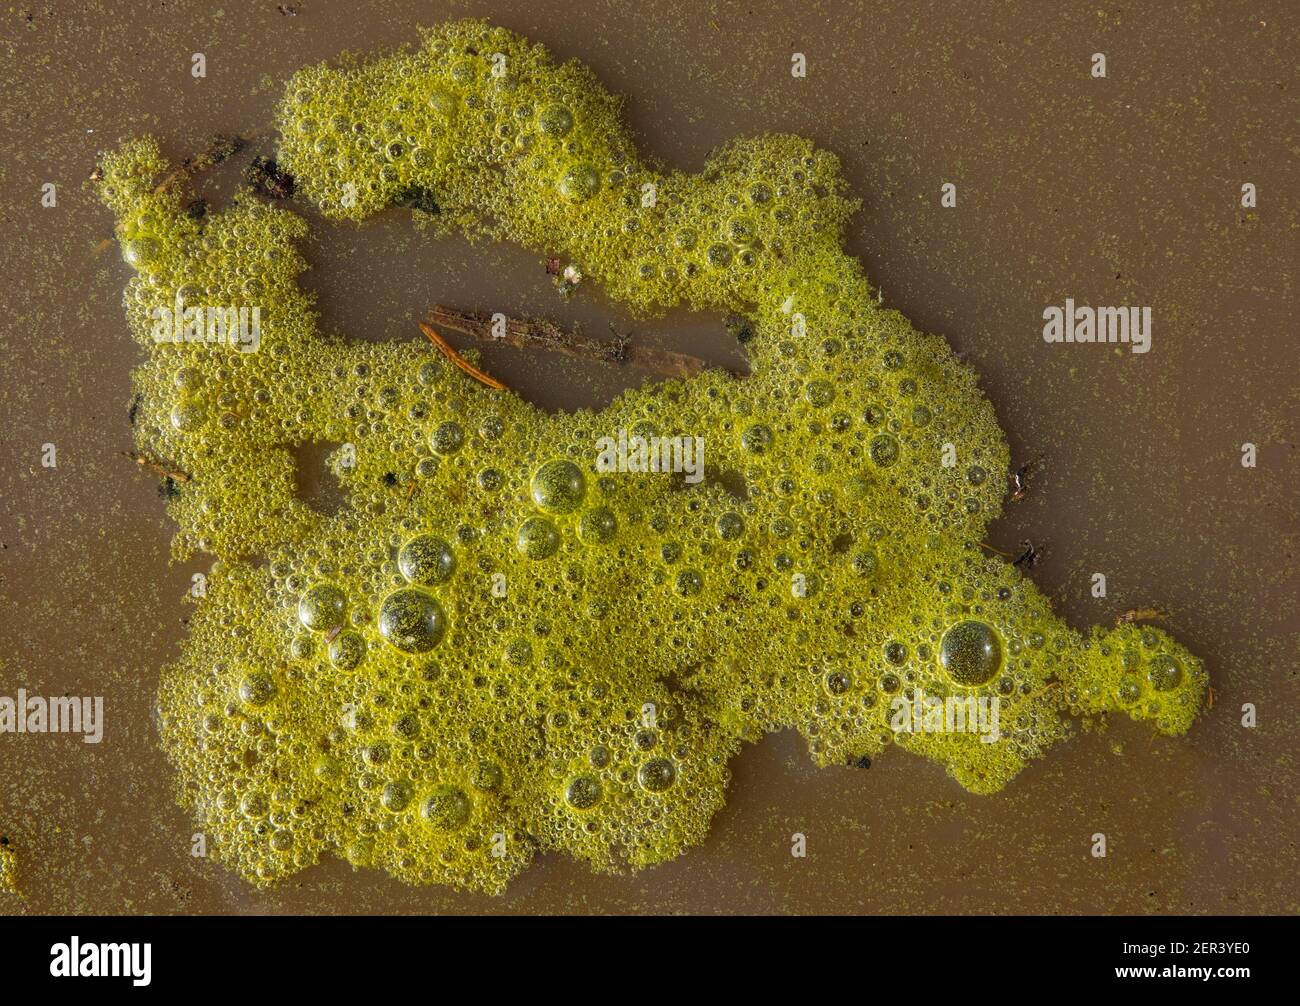 Eutrophication, green foam caused by algae floating on brown water Stock Photo